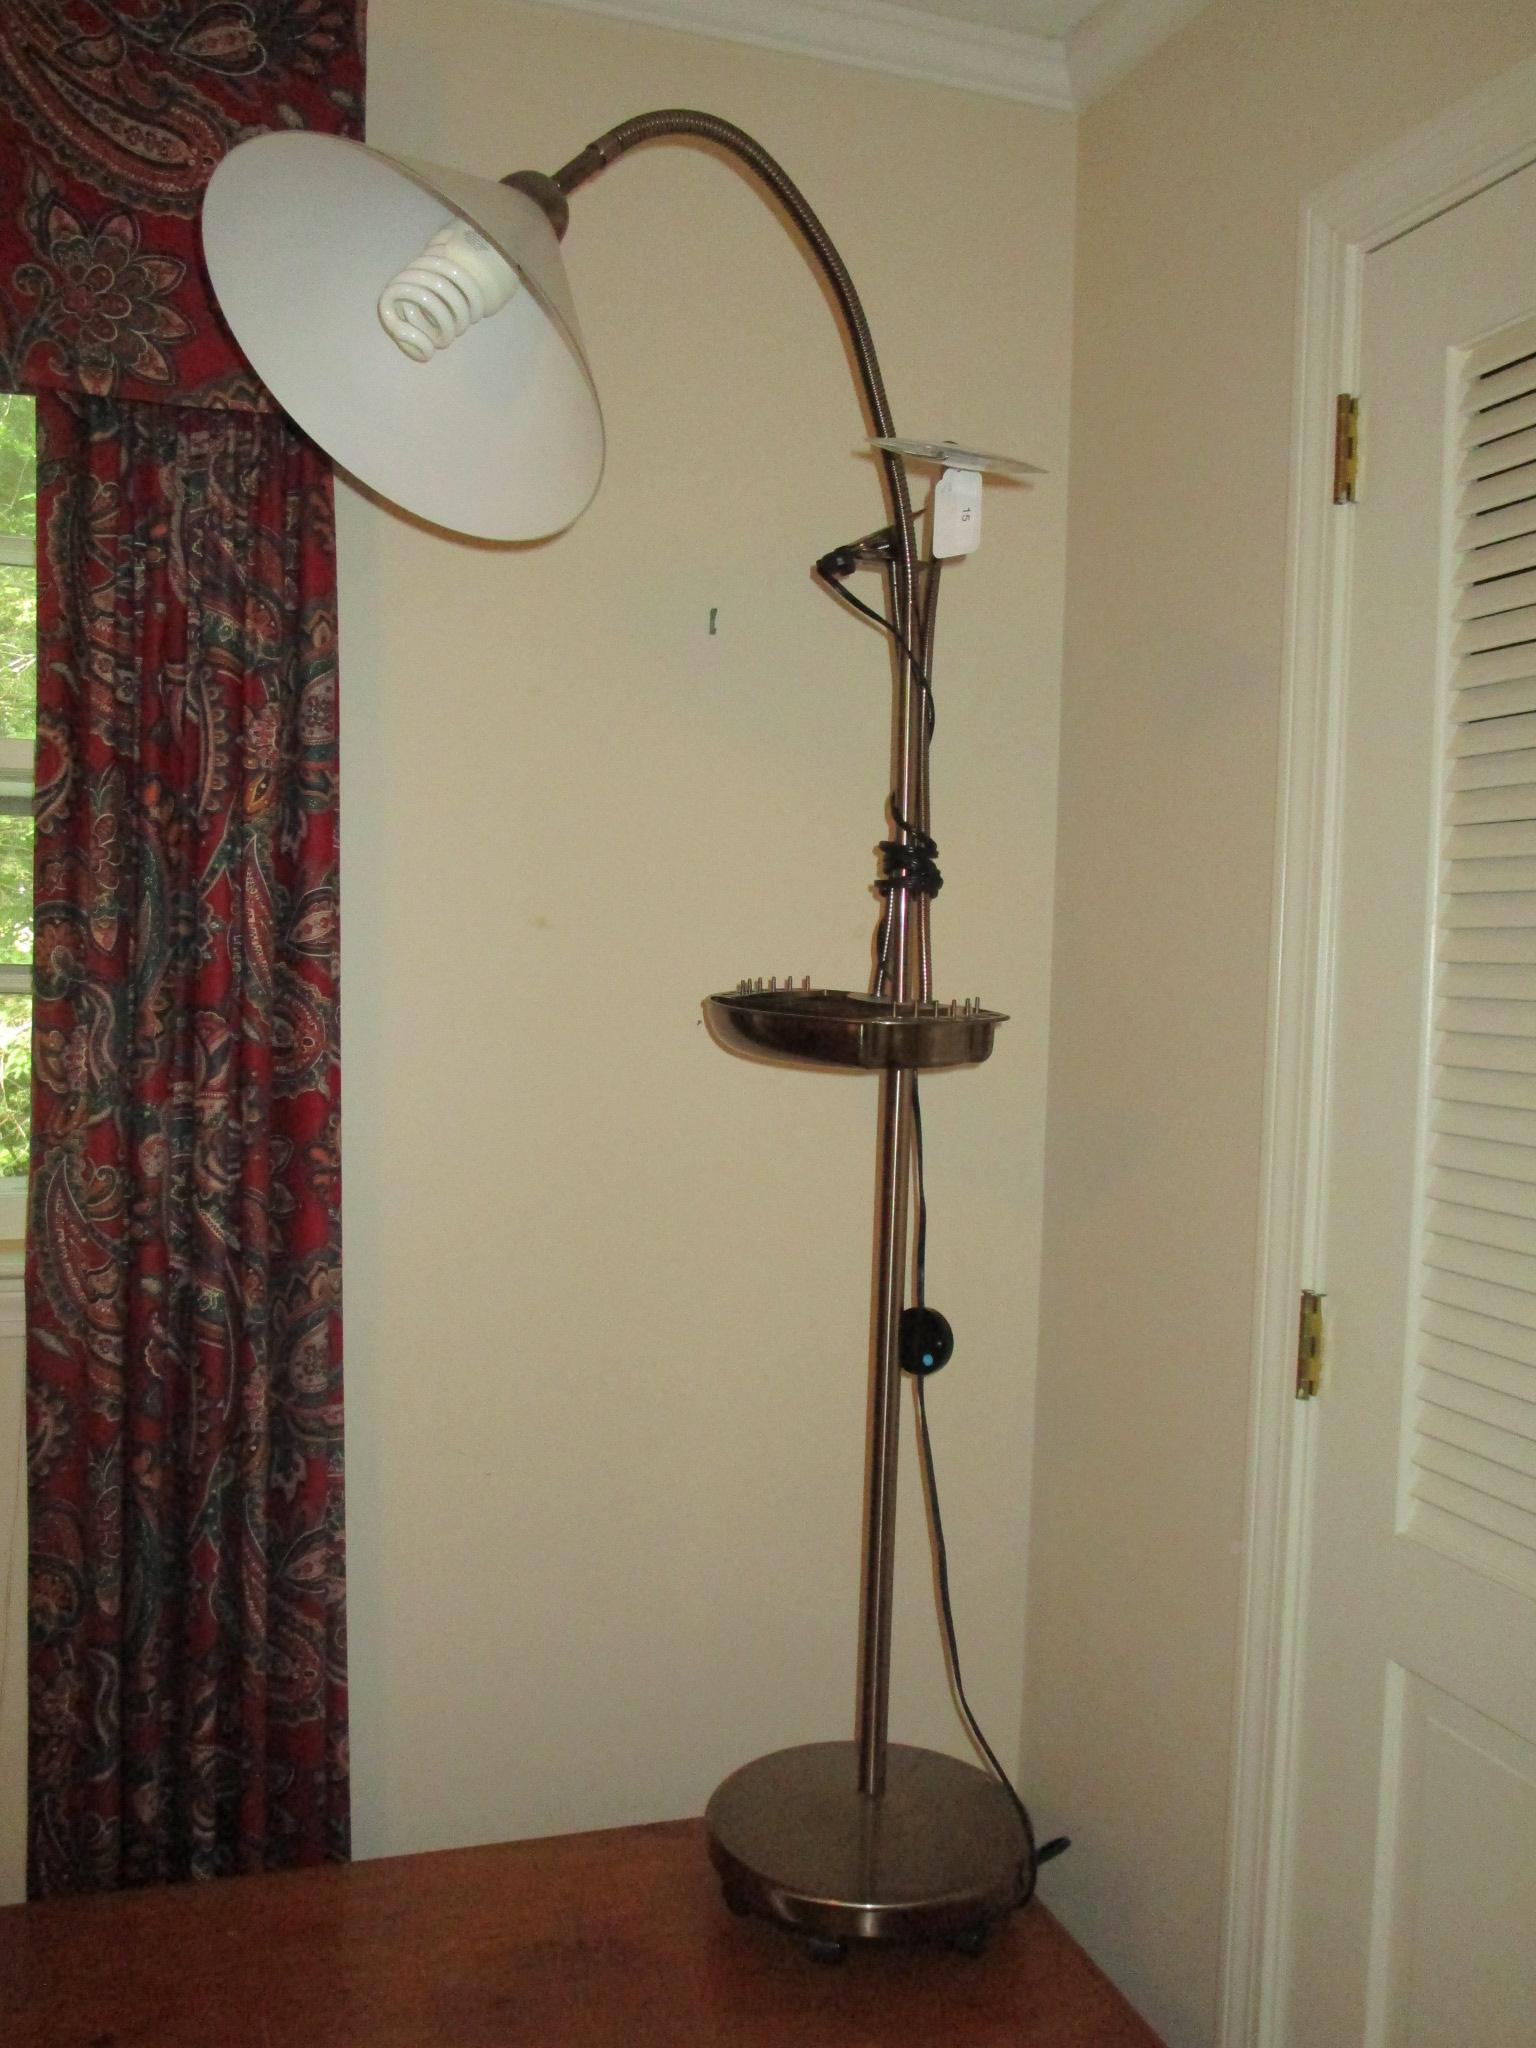 Sewing/Magnifier Floor Lamp    57 1/2" T  Approx.